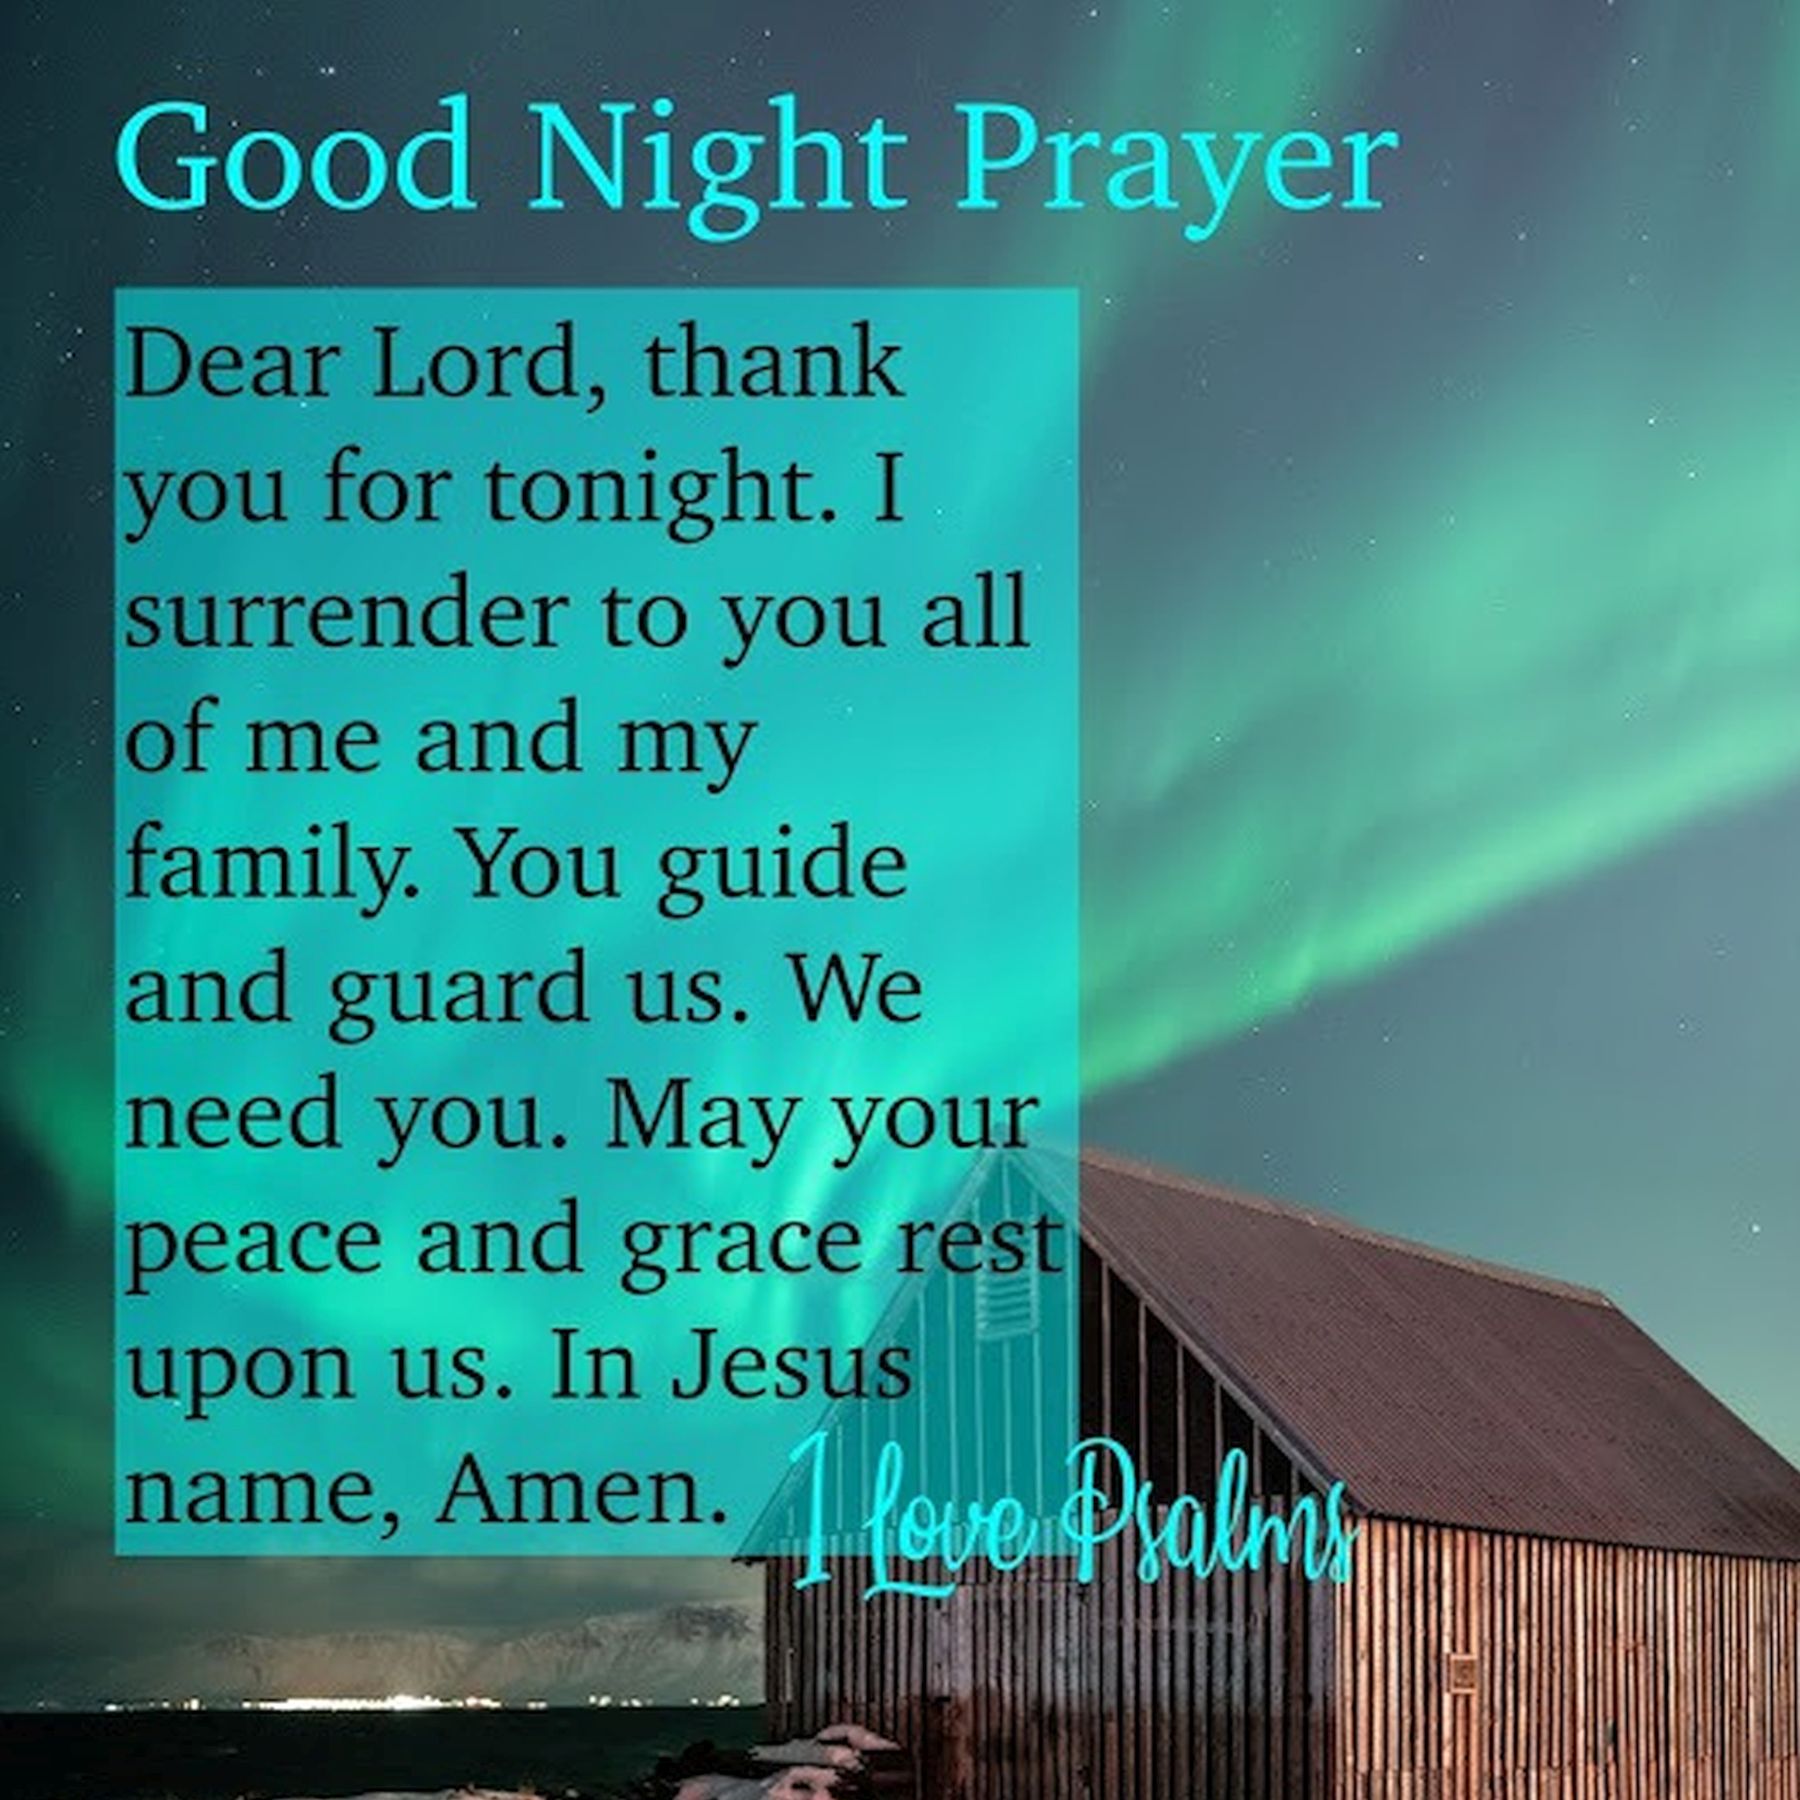 Good Night Prayer - Lord, You guide and guard us!